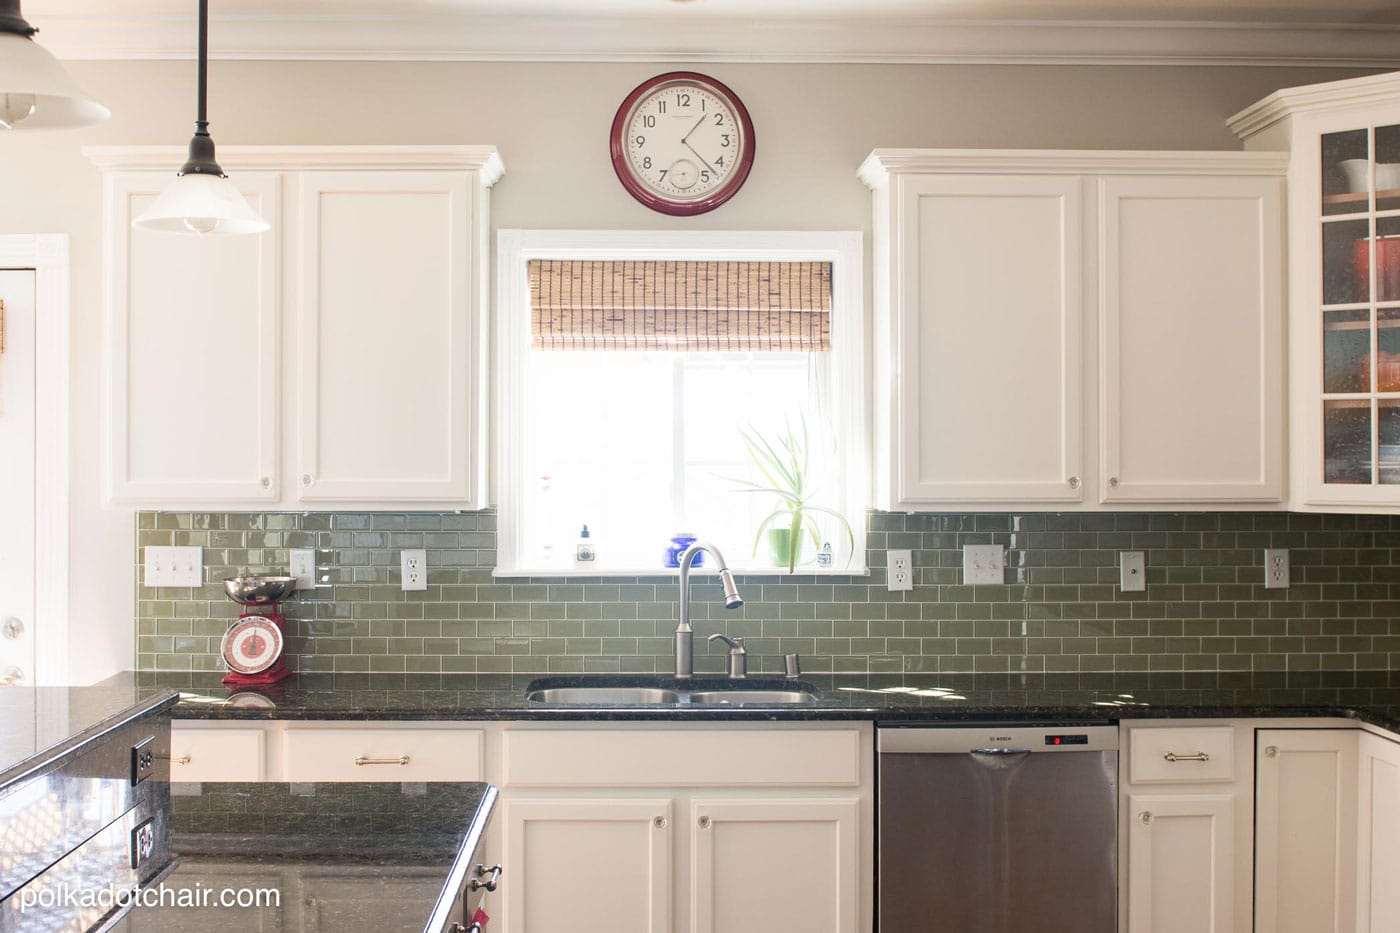 Painted Kitchen Cabinet Ideas and Kitchen Makeover Reveal - The Polka